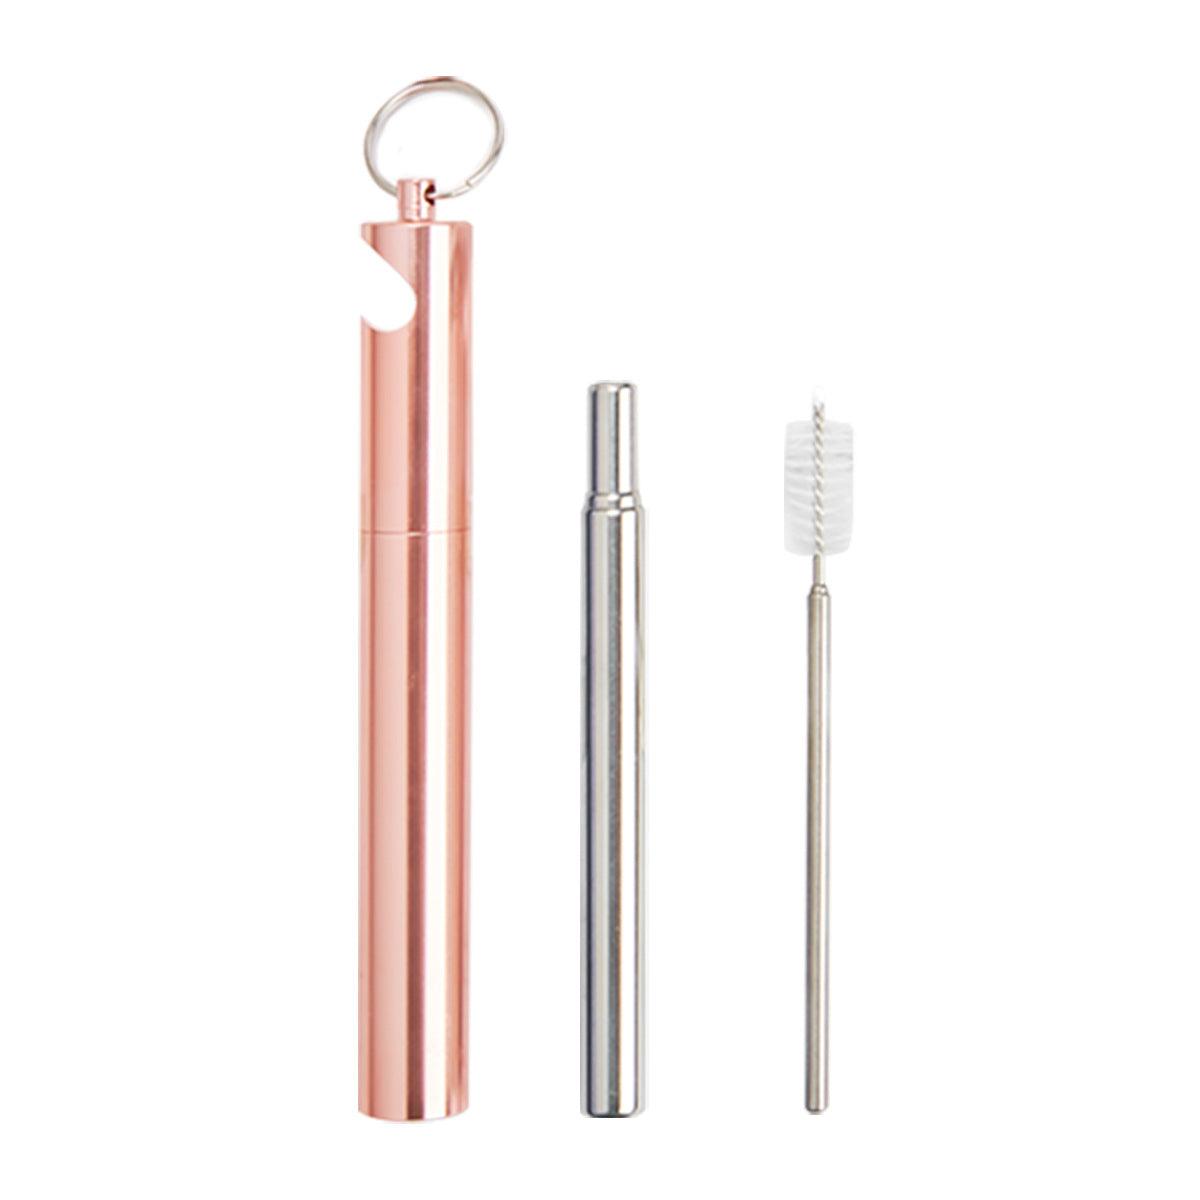 Stainless Steel Metal Straw Reusable Travel Keychain Straw with Case Bottle Opener - Captain's Quarters